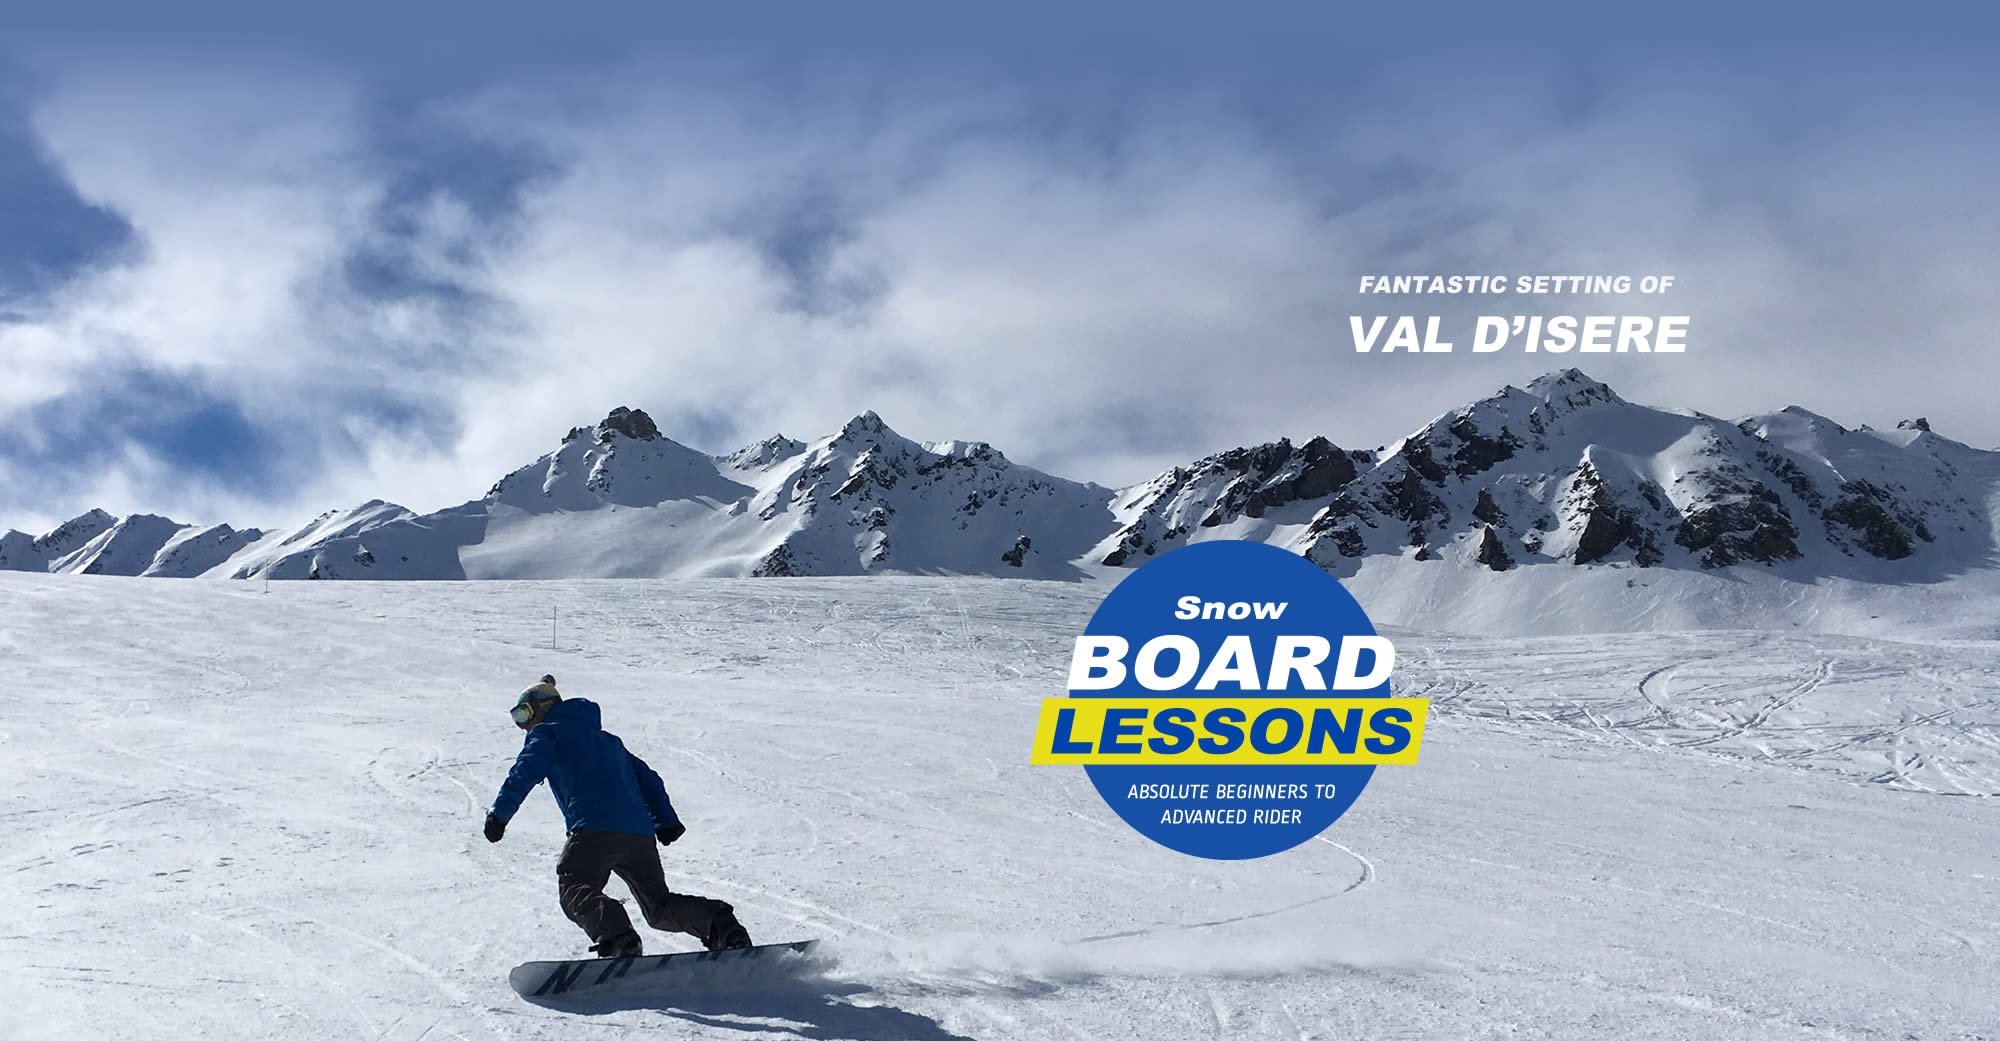 Snowboarding Instruction at Val d'Isere in the French Alps